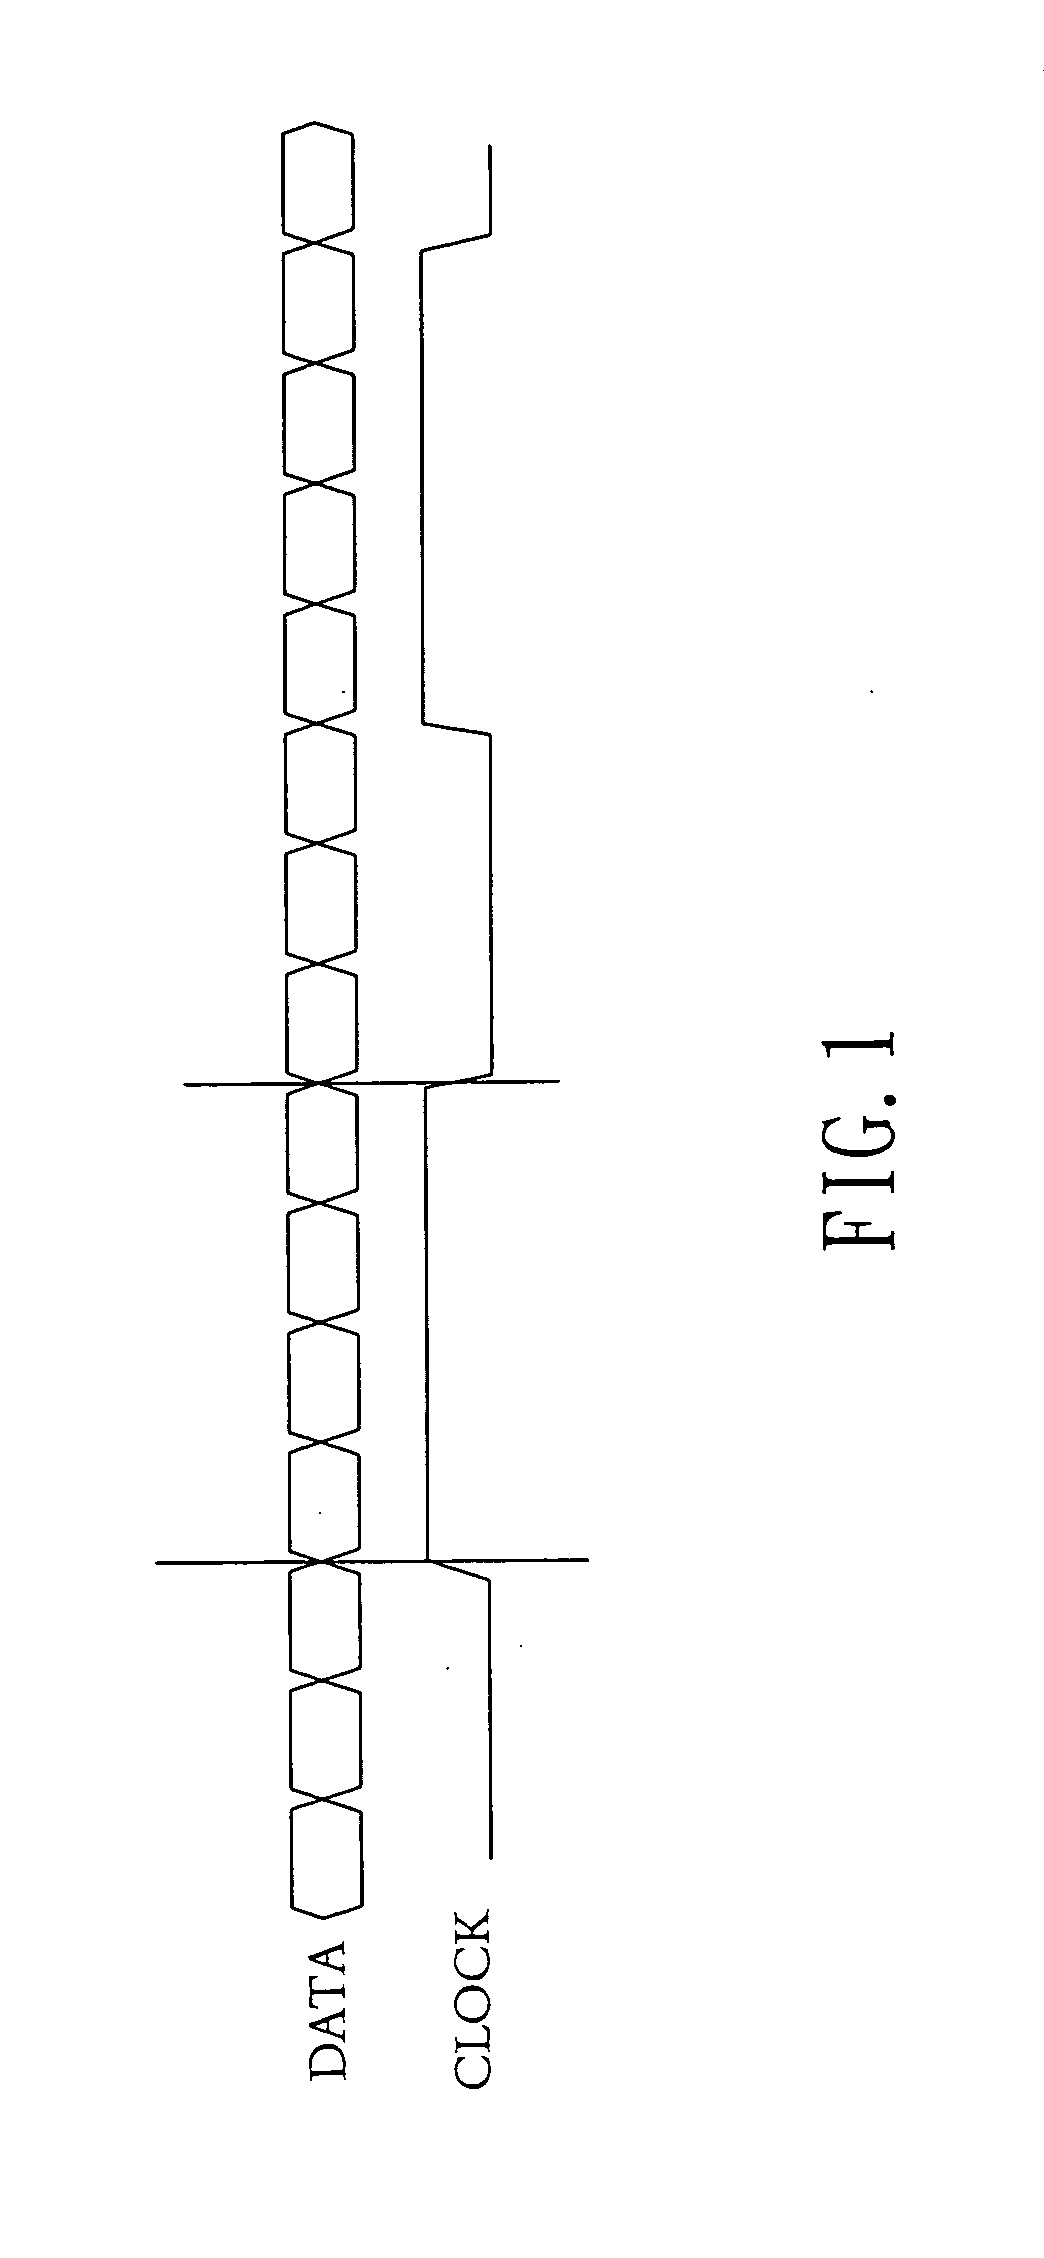 Low voltage differential signal receiving device